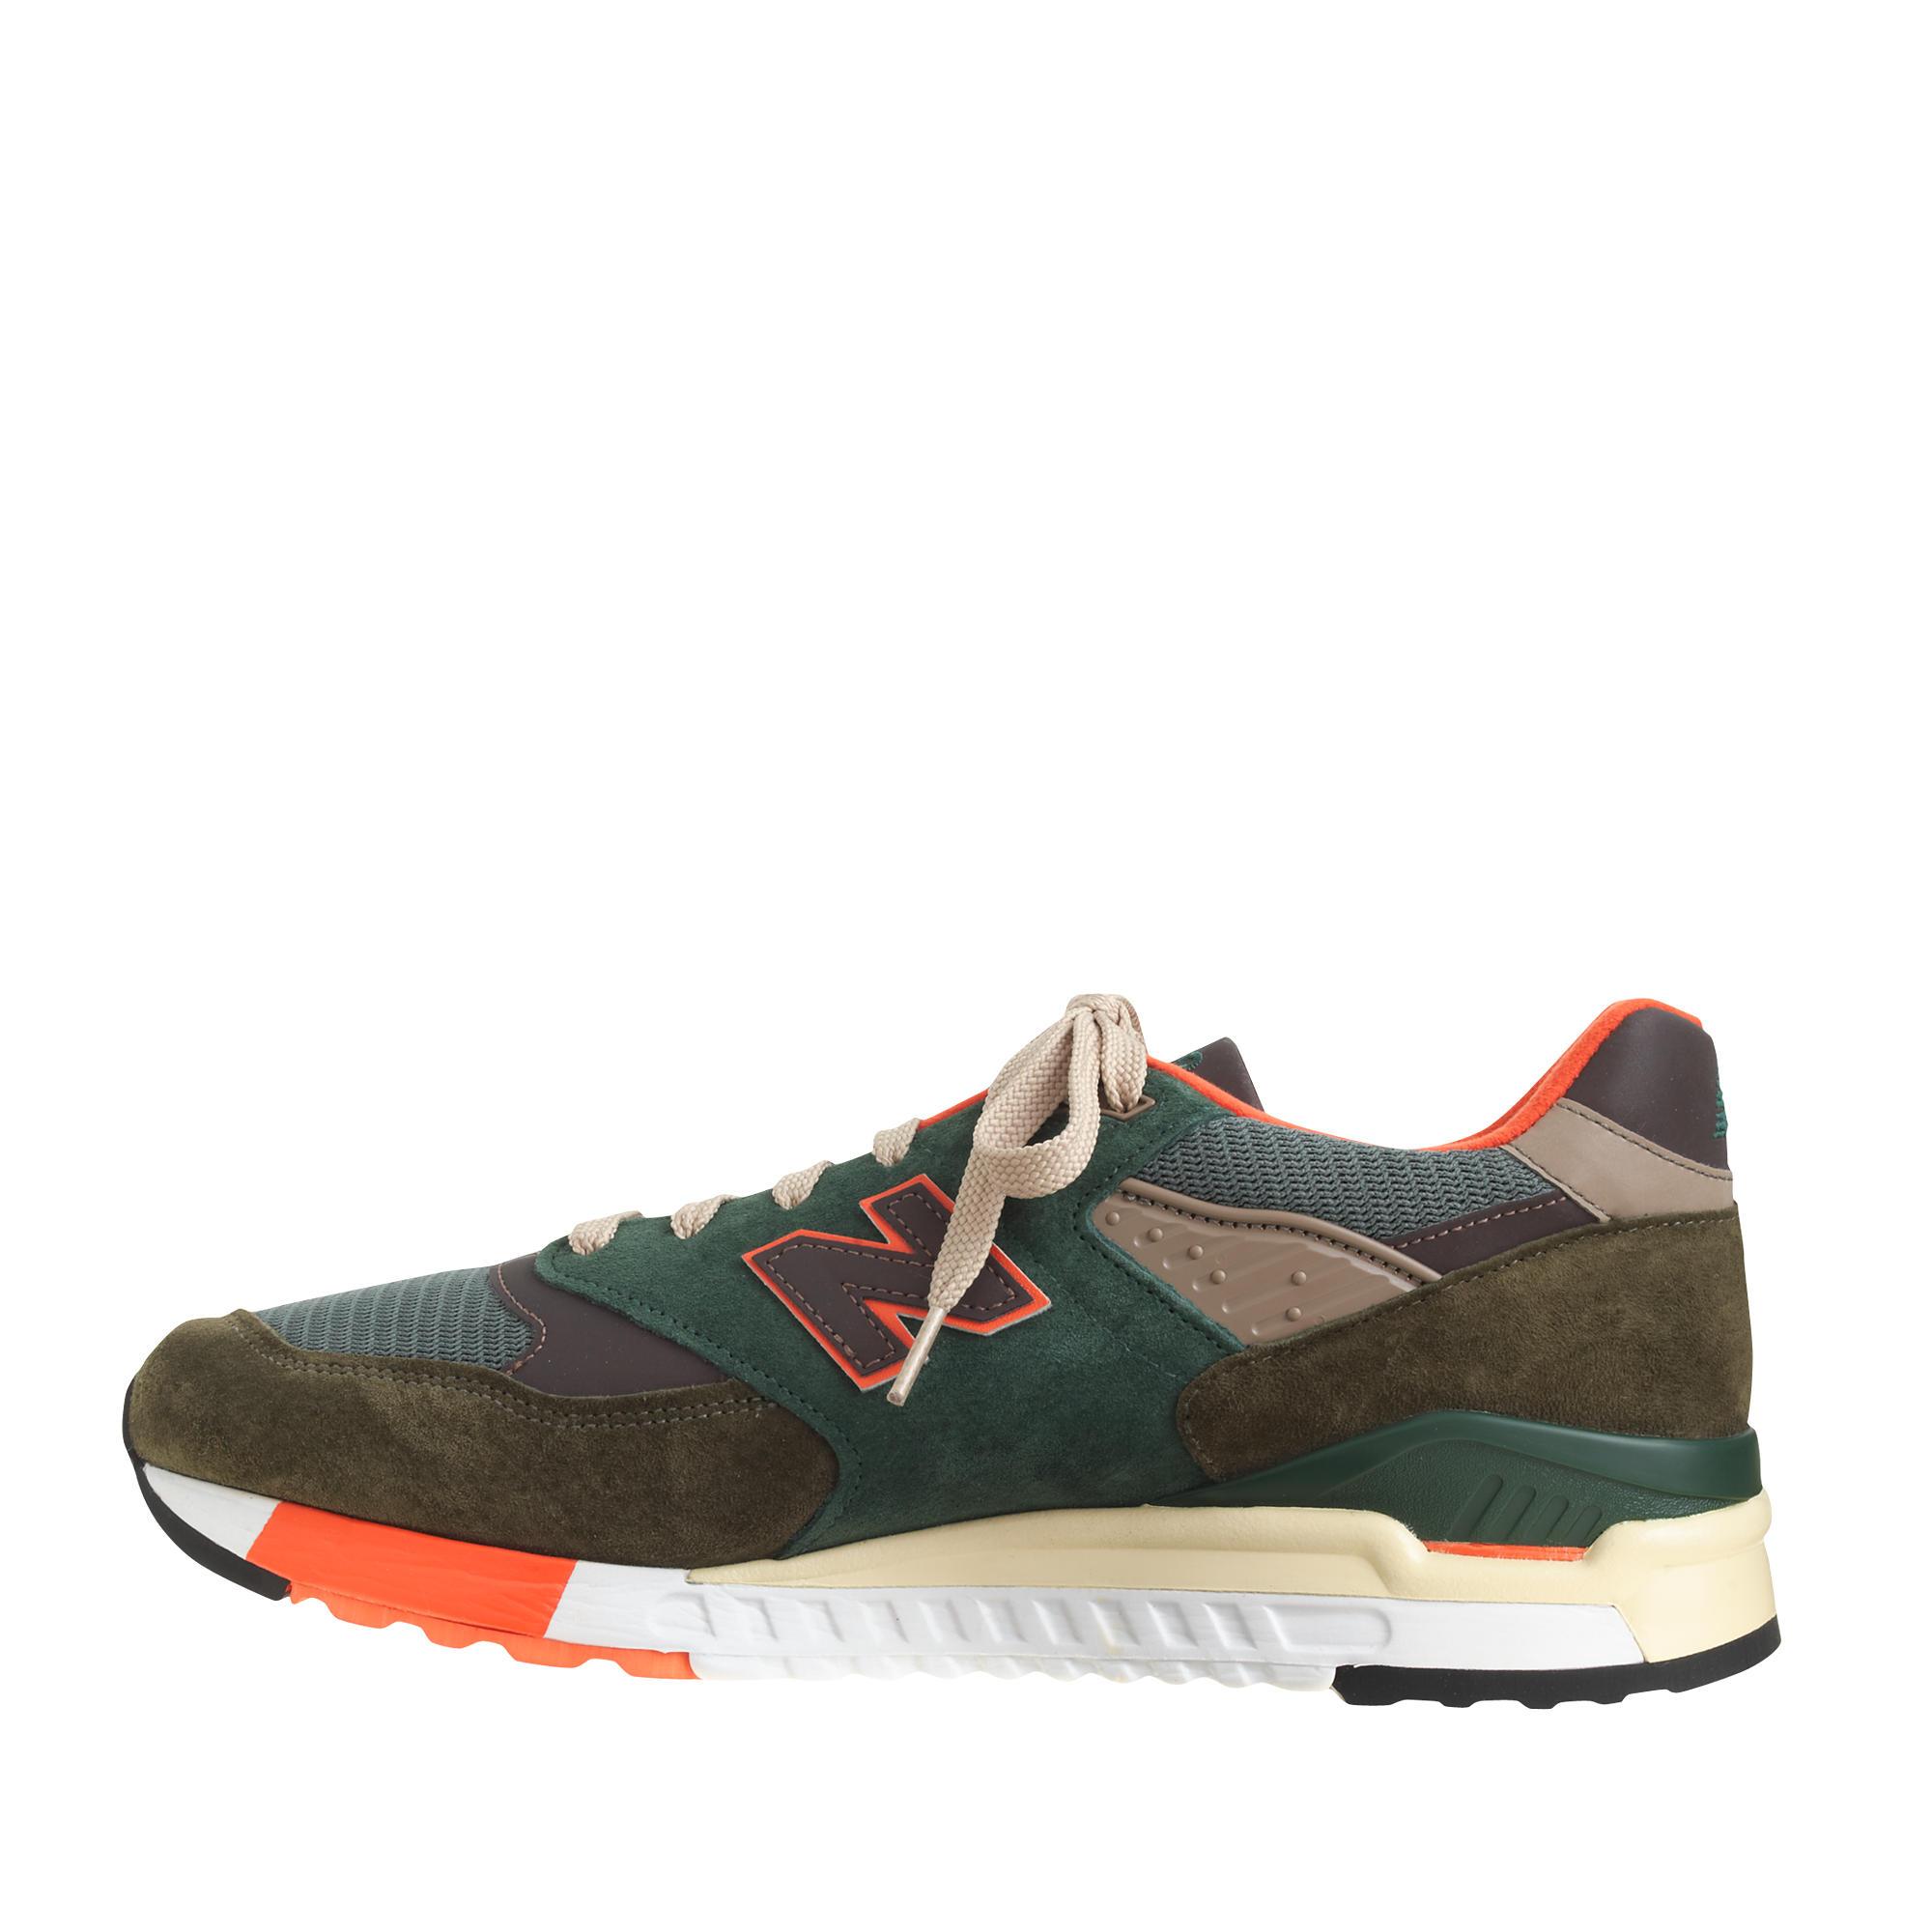 New Balance Concrete Jungle Top Sellers, SAVE 56% - pacificlanding.ca